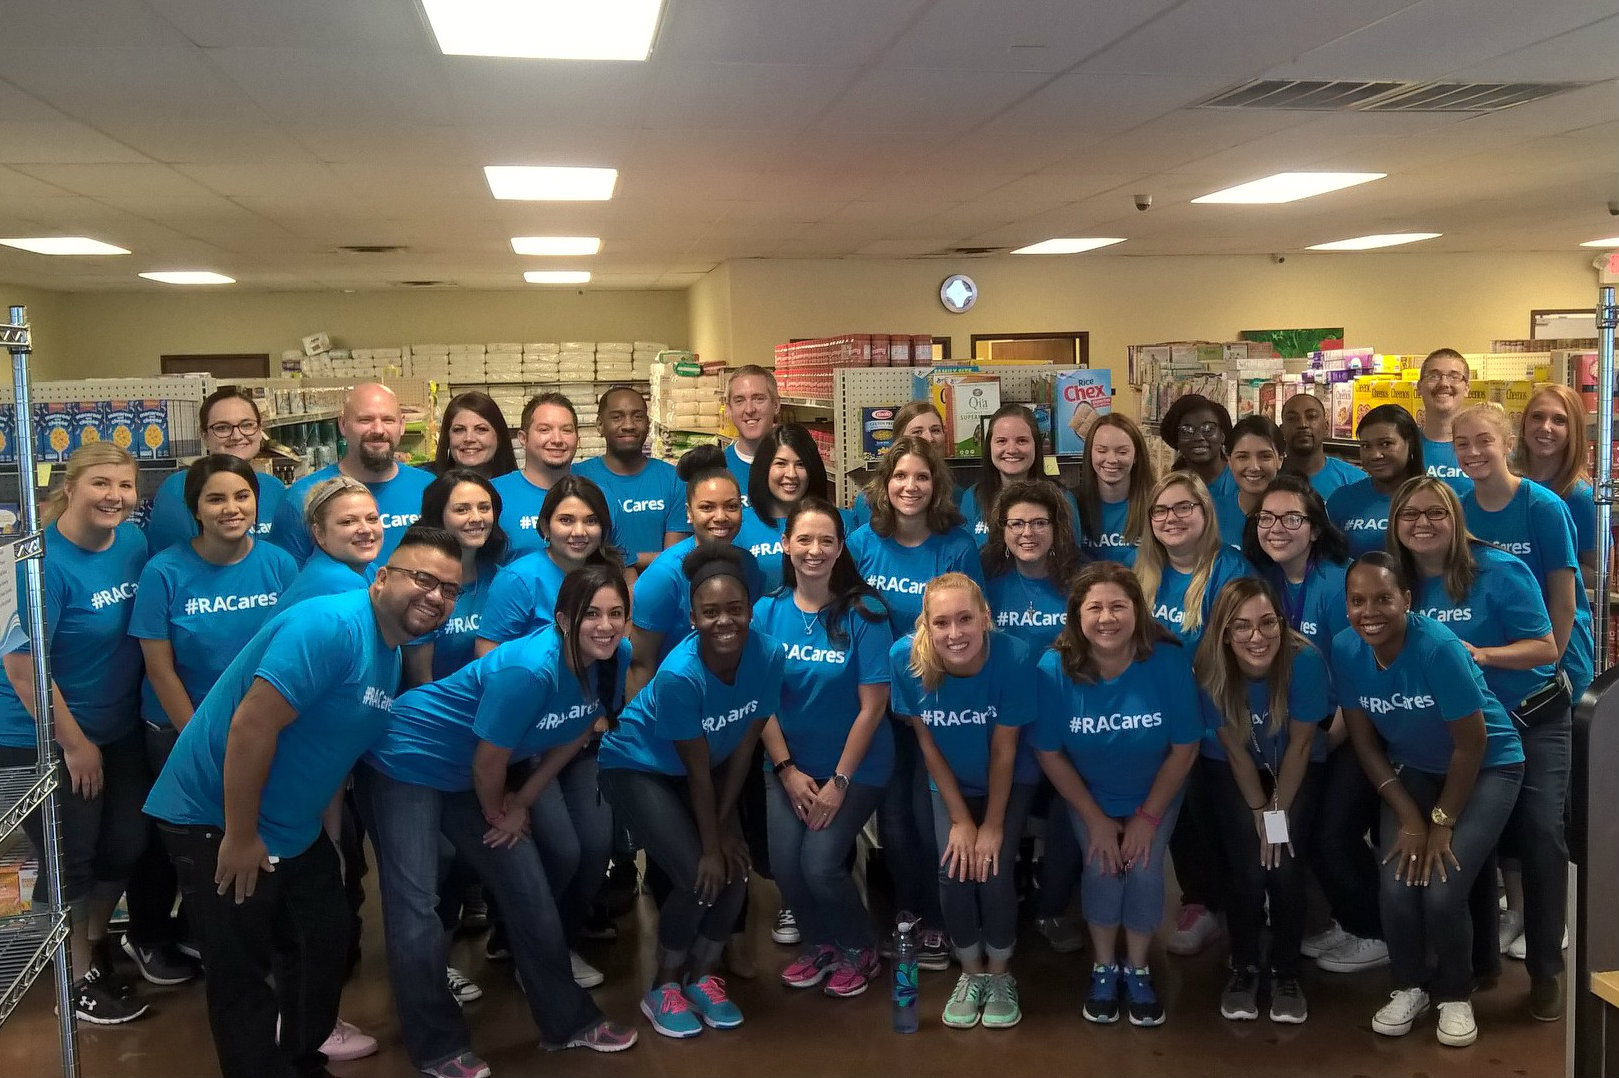 Rent-A-Center Encourages Volunteerism With a Day at Frisco Food Pantry